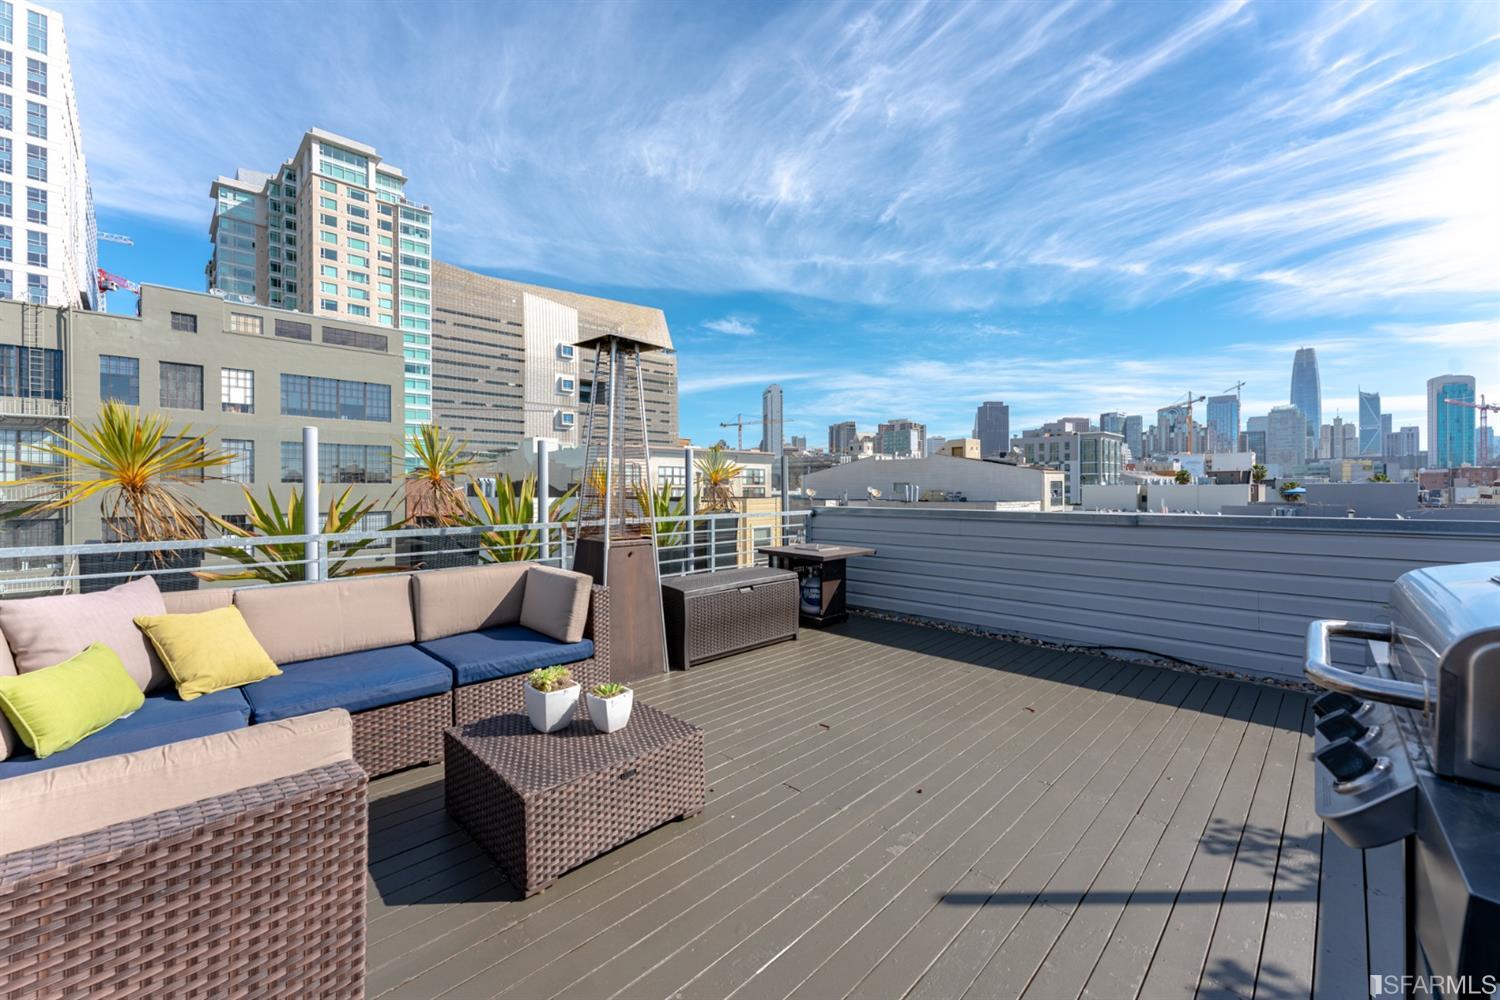 Welcome to 660 Natoma!  Escape to your own private roof deck and leave the hustle of the city behind. This incredible roof deck is exclusive to this condo and easily accessed via an internal staircase.